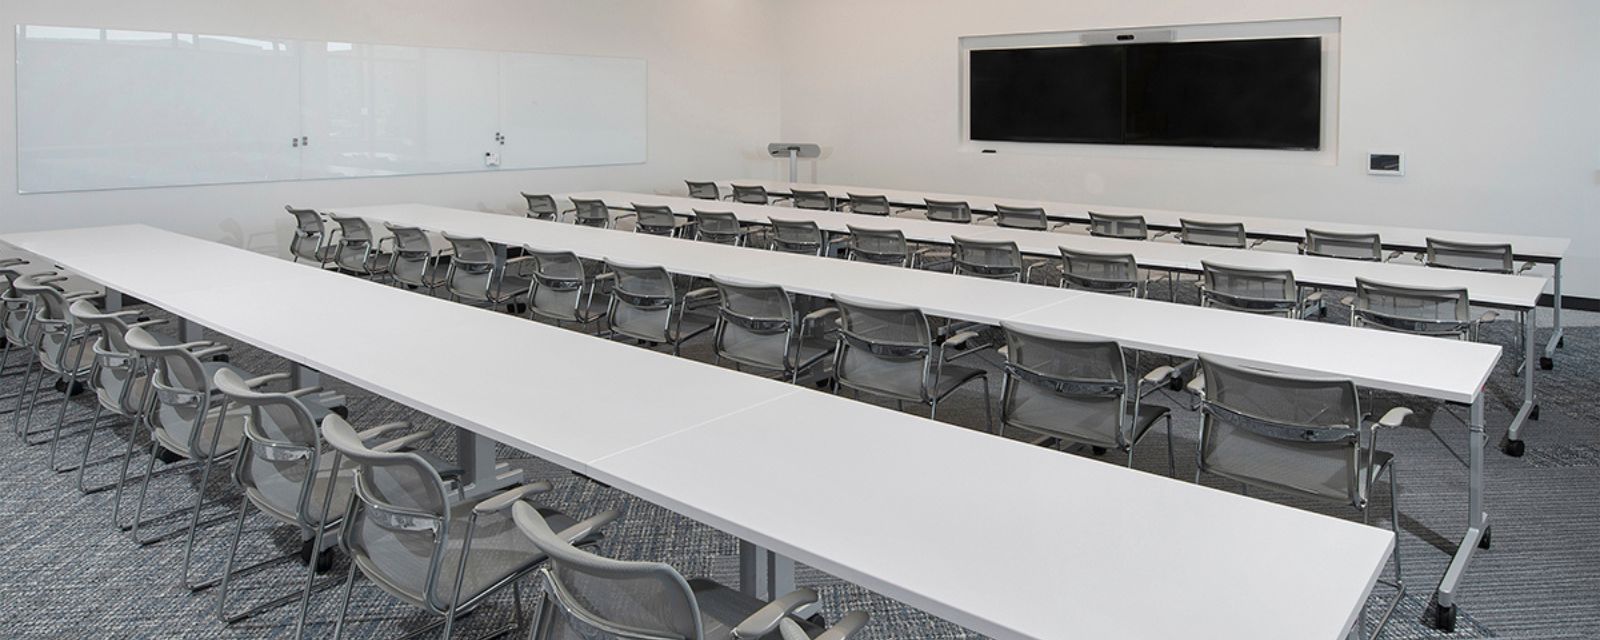 Ridgegate conference room with long white tables.